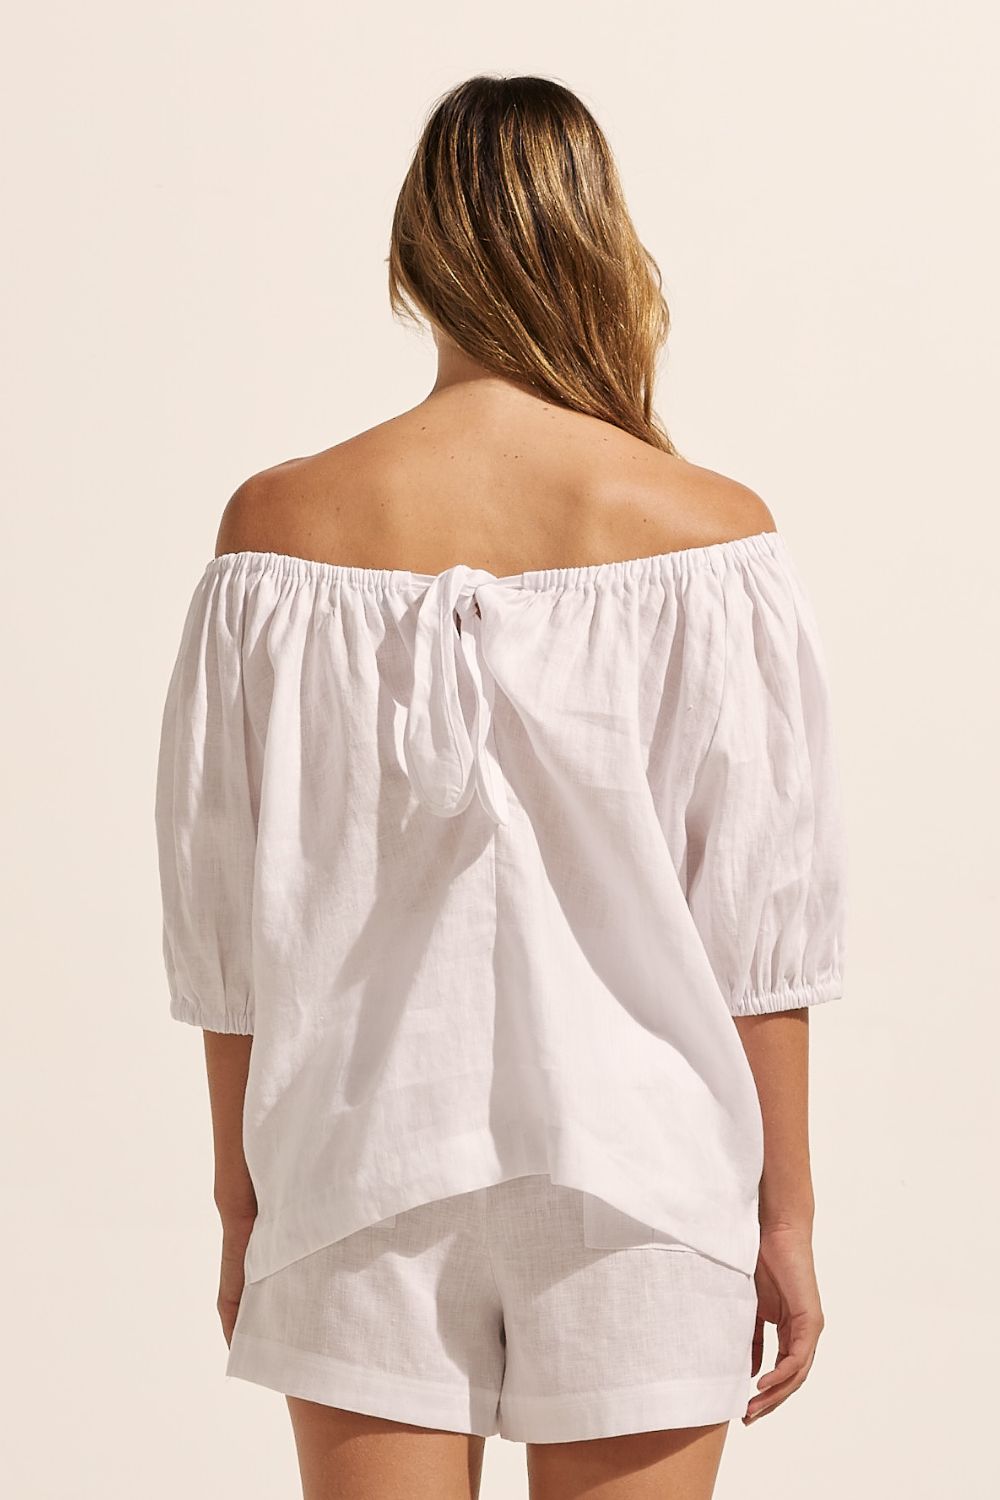 white, top, off-the-shoulder, mid-length sleeve, small side splits, elasticated sleeve cuff, tie at back, back image